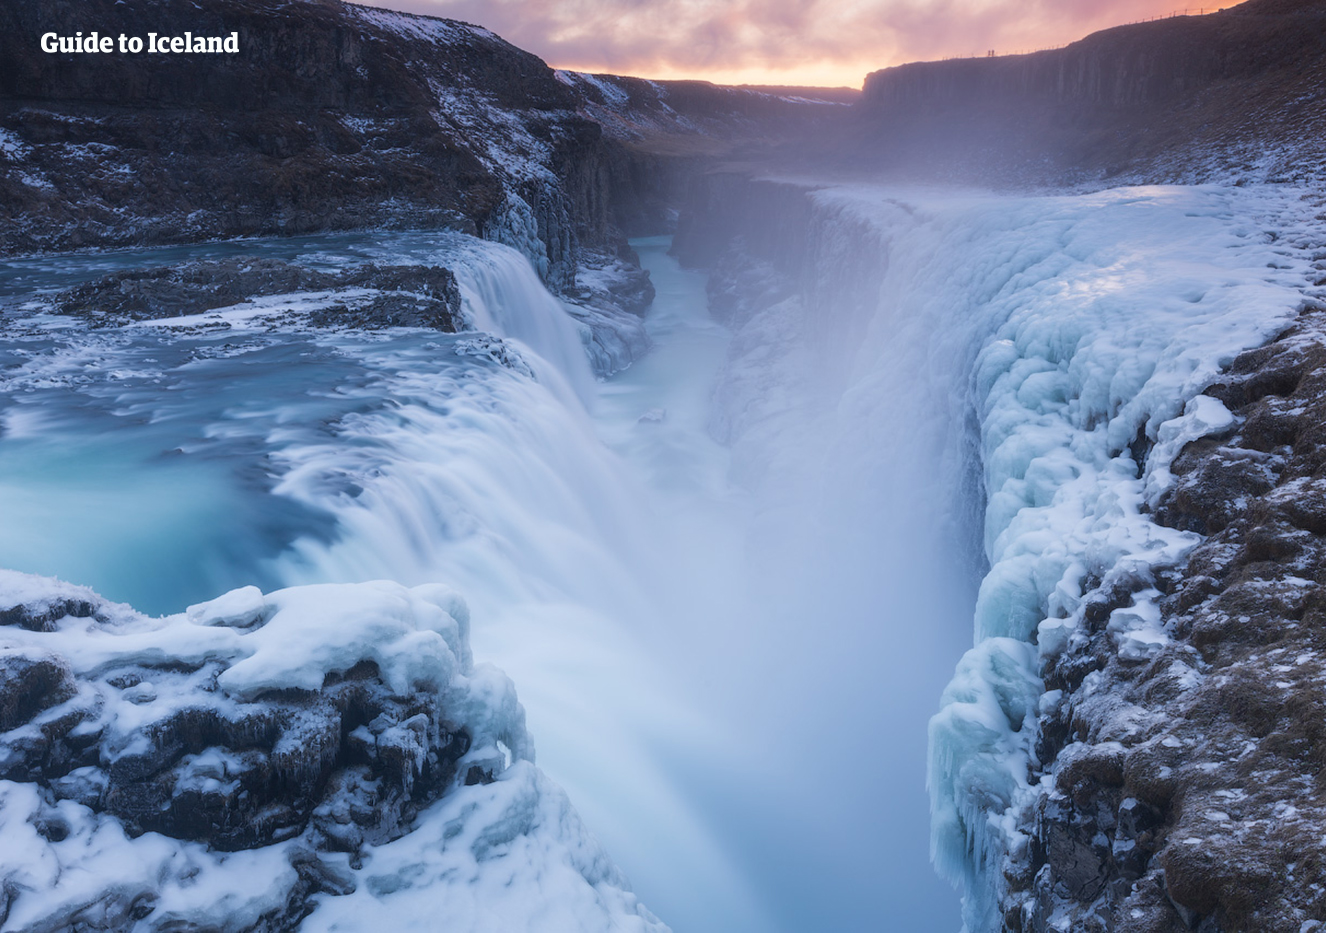 Power and beauty are rolled into one at Gullfoss waterfall, located on the Golden Circle route.